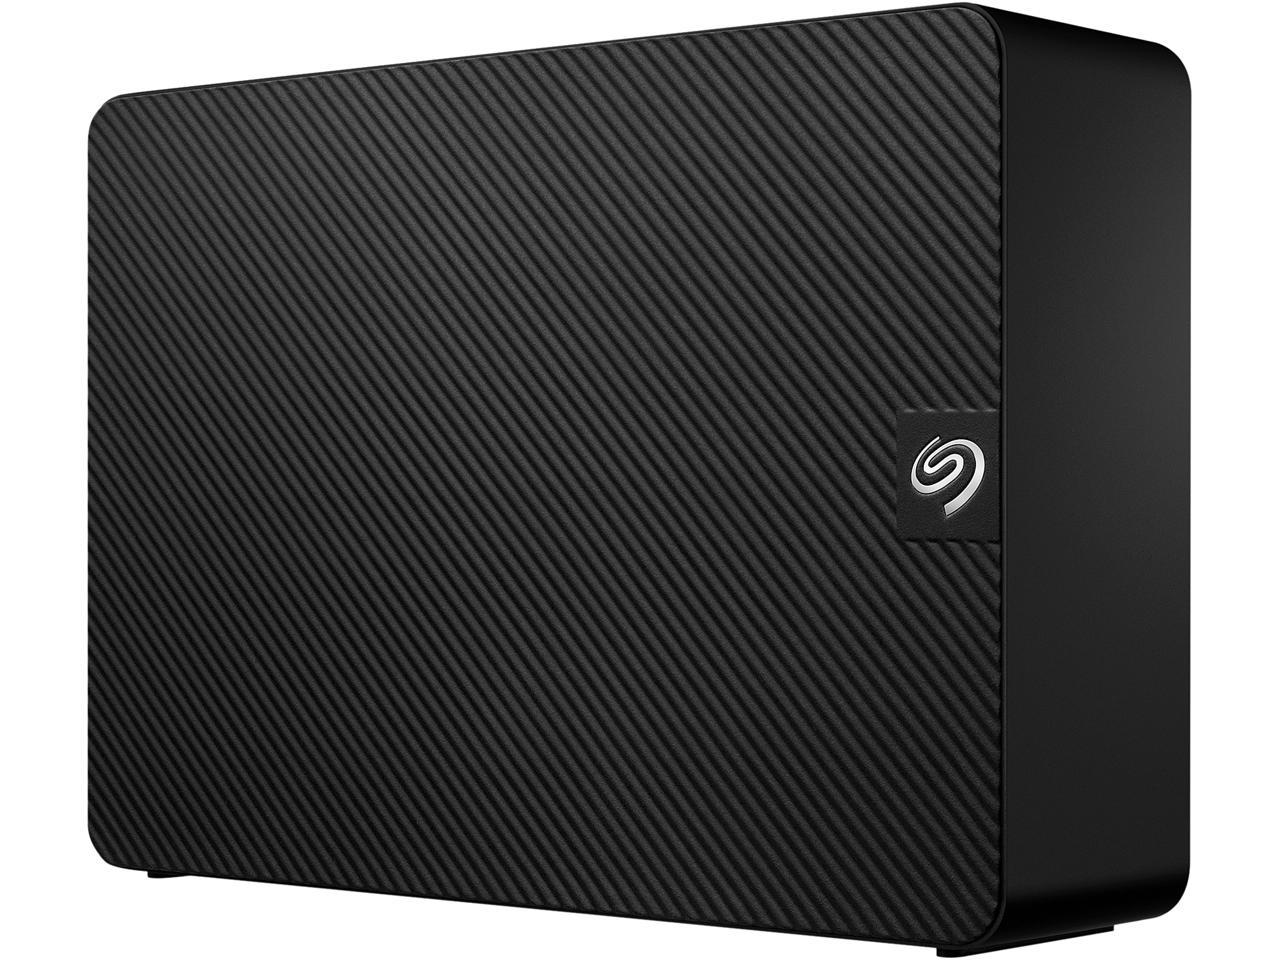 Seagate Expansion 14TB External Hard Drive HDD - USB 3.0, with Rescue Data Recovery Services (STKP14000400) $209.99 Newegg